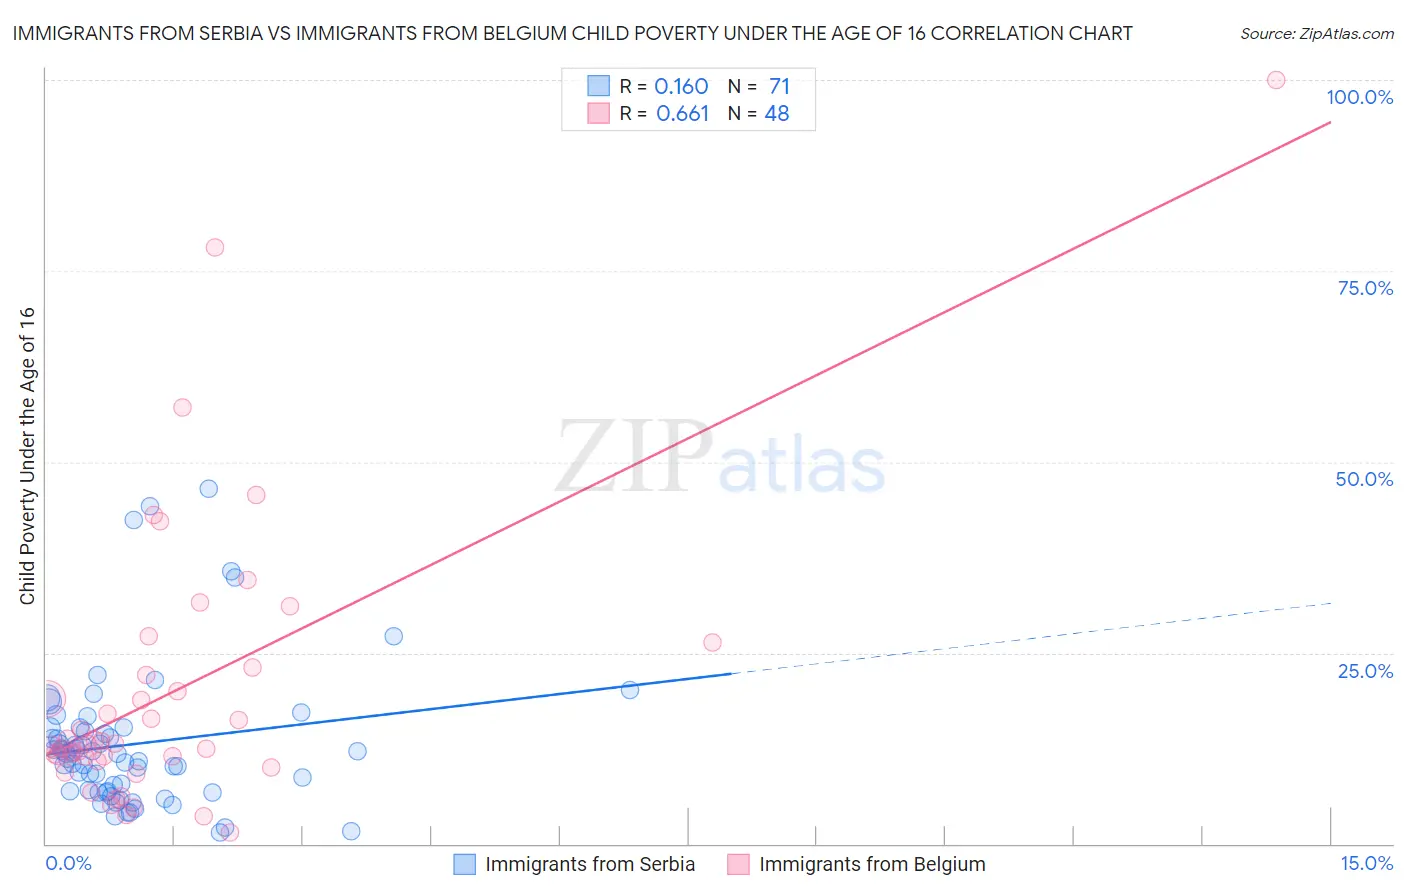 Immigrants from Serbia vs Immigrants from Belgium Child Poverty Under the Age of 16